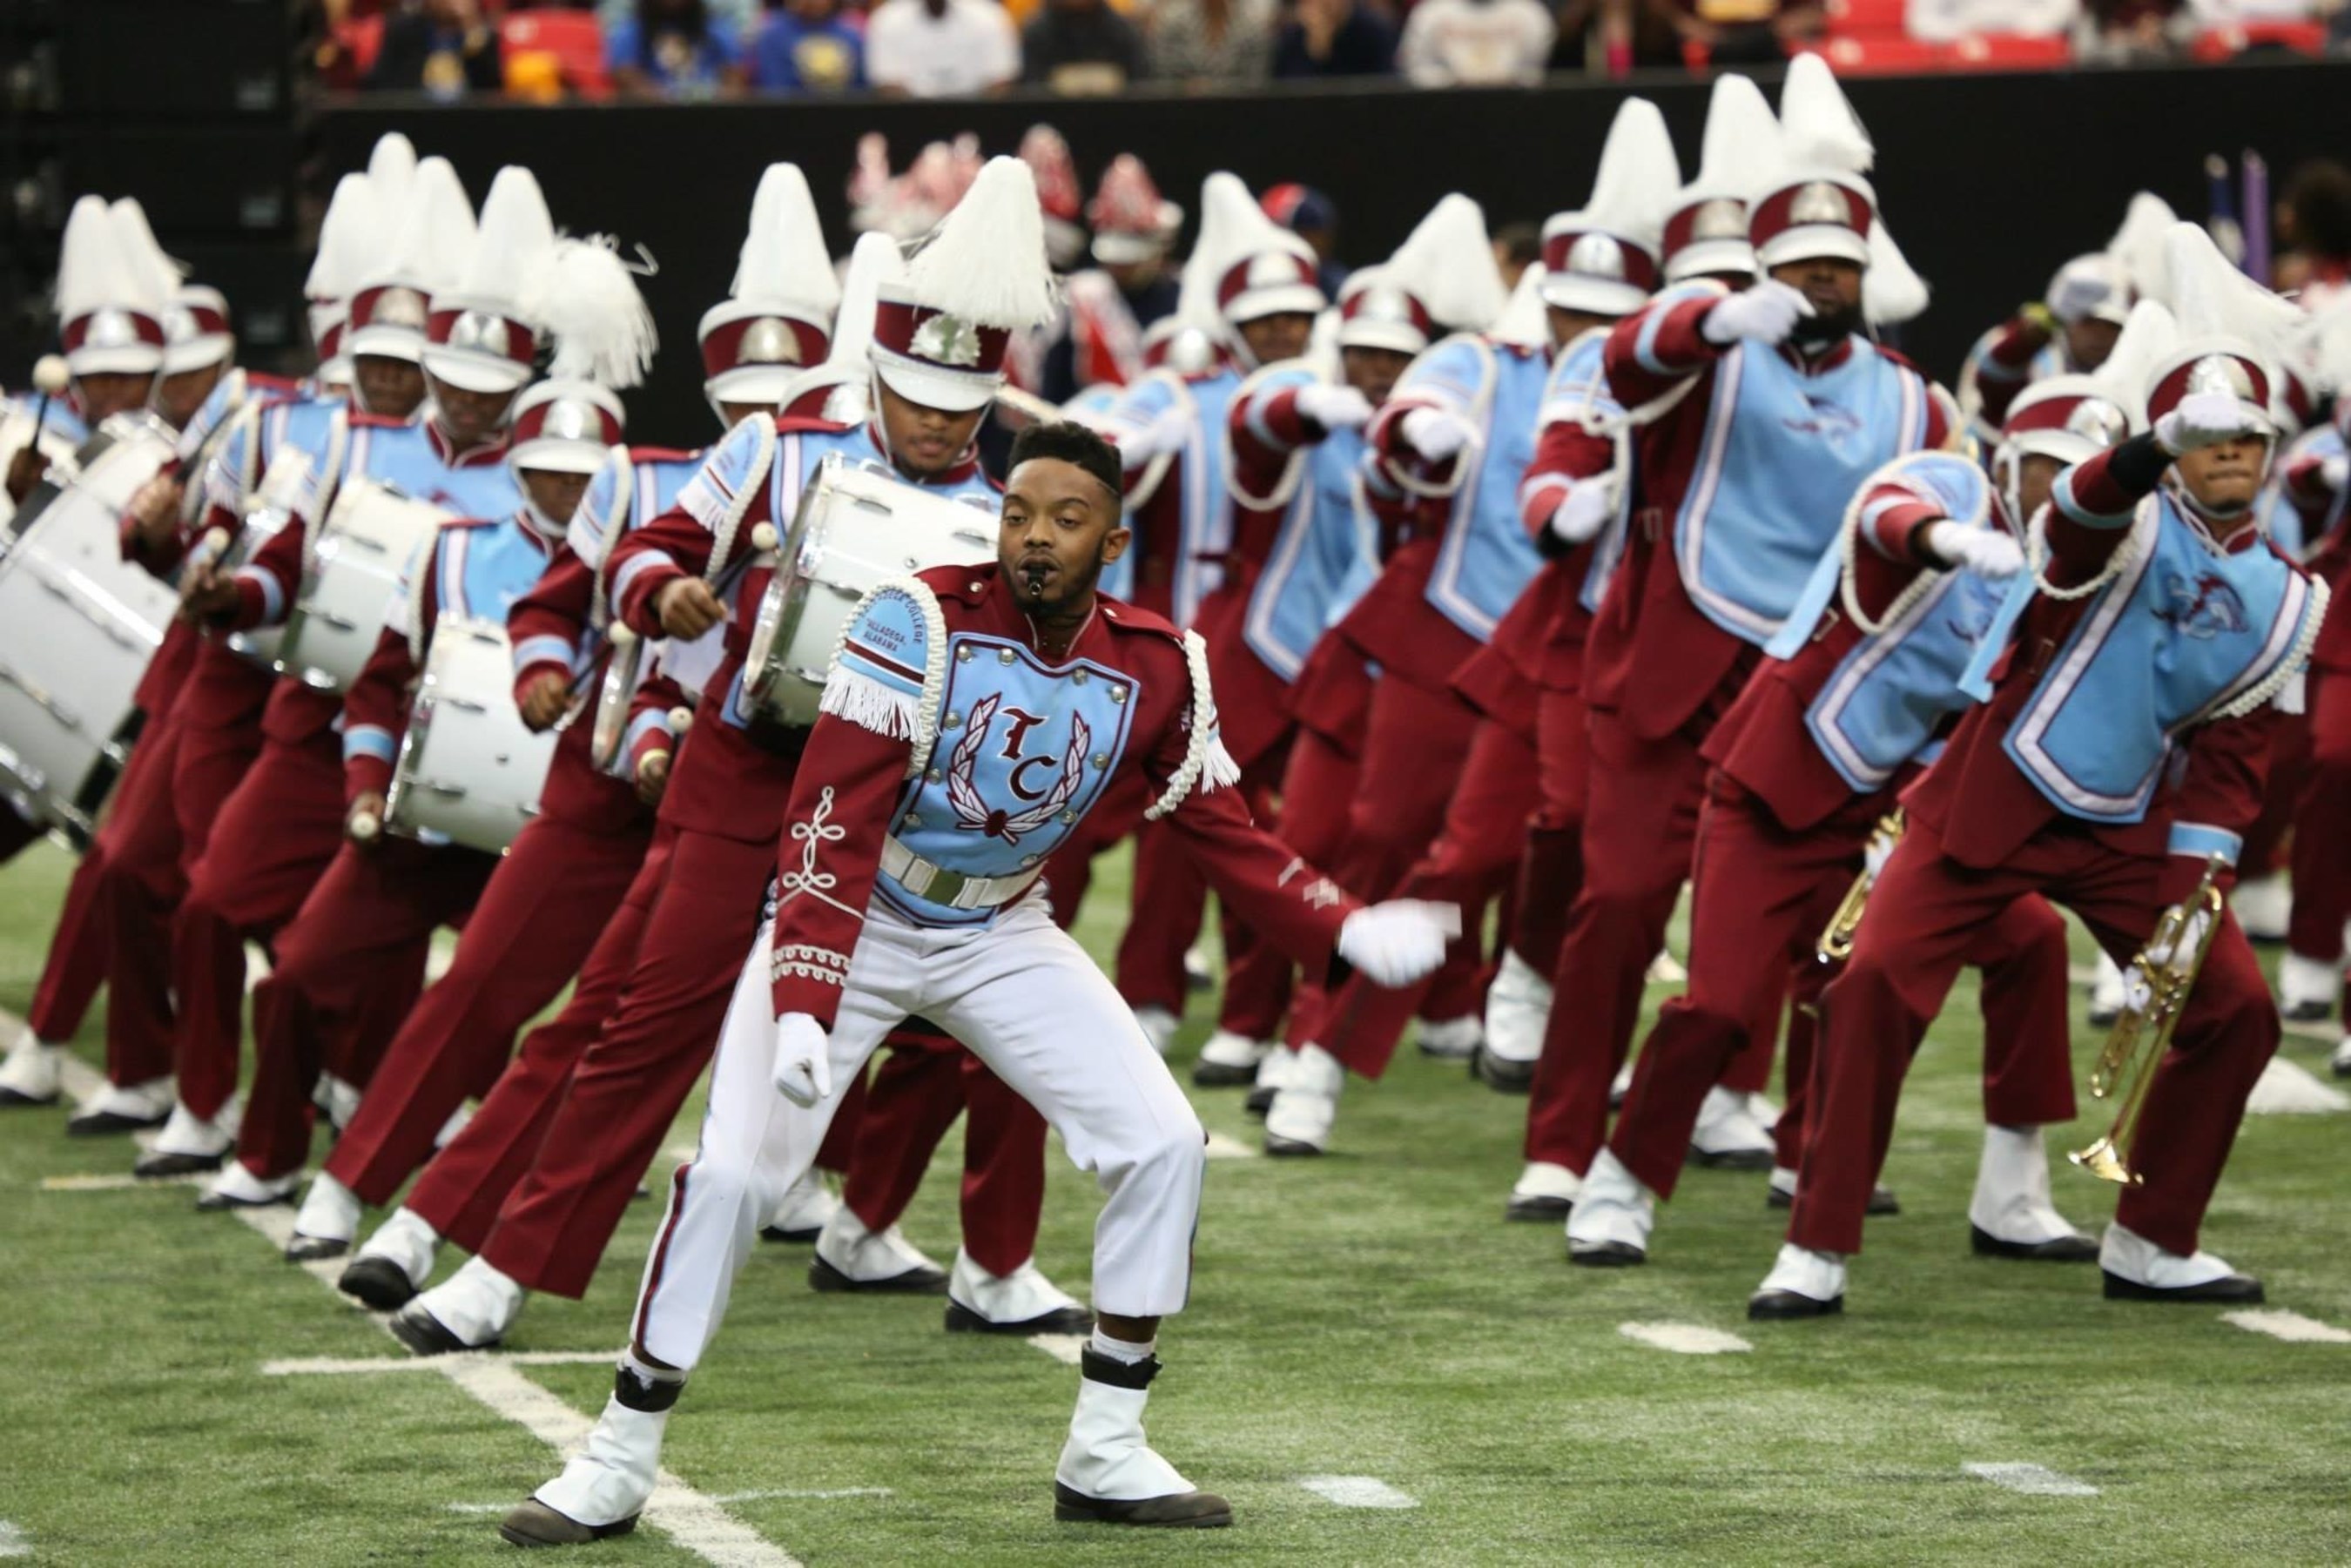 Nearly 60,000 fans packed the Georgia Dome to watch the Talladega College Marching Tornadoes and top bands from America's Historically Black Colleges and Universities rock the house at the 13th annual Honda Battle of the Bands Invitational Showcase on Jan. 24, 2015.